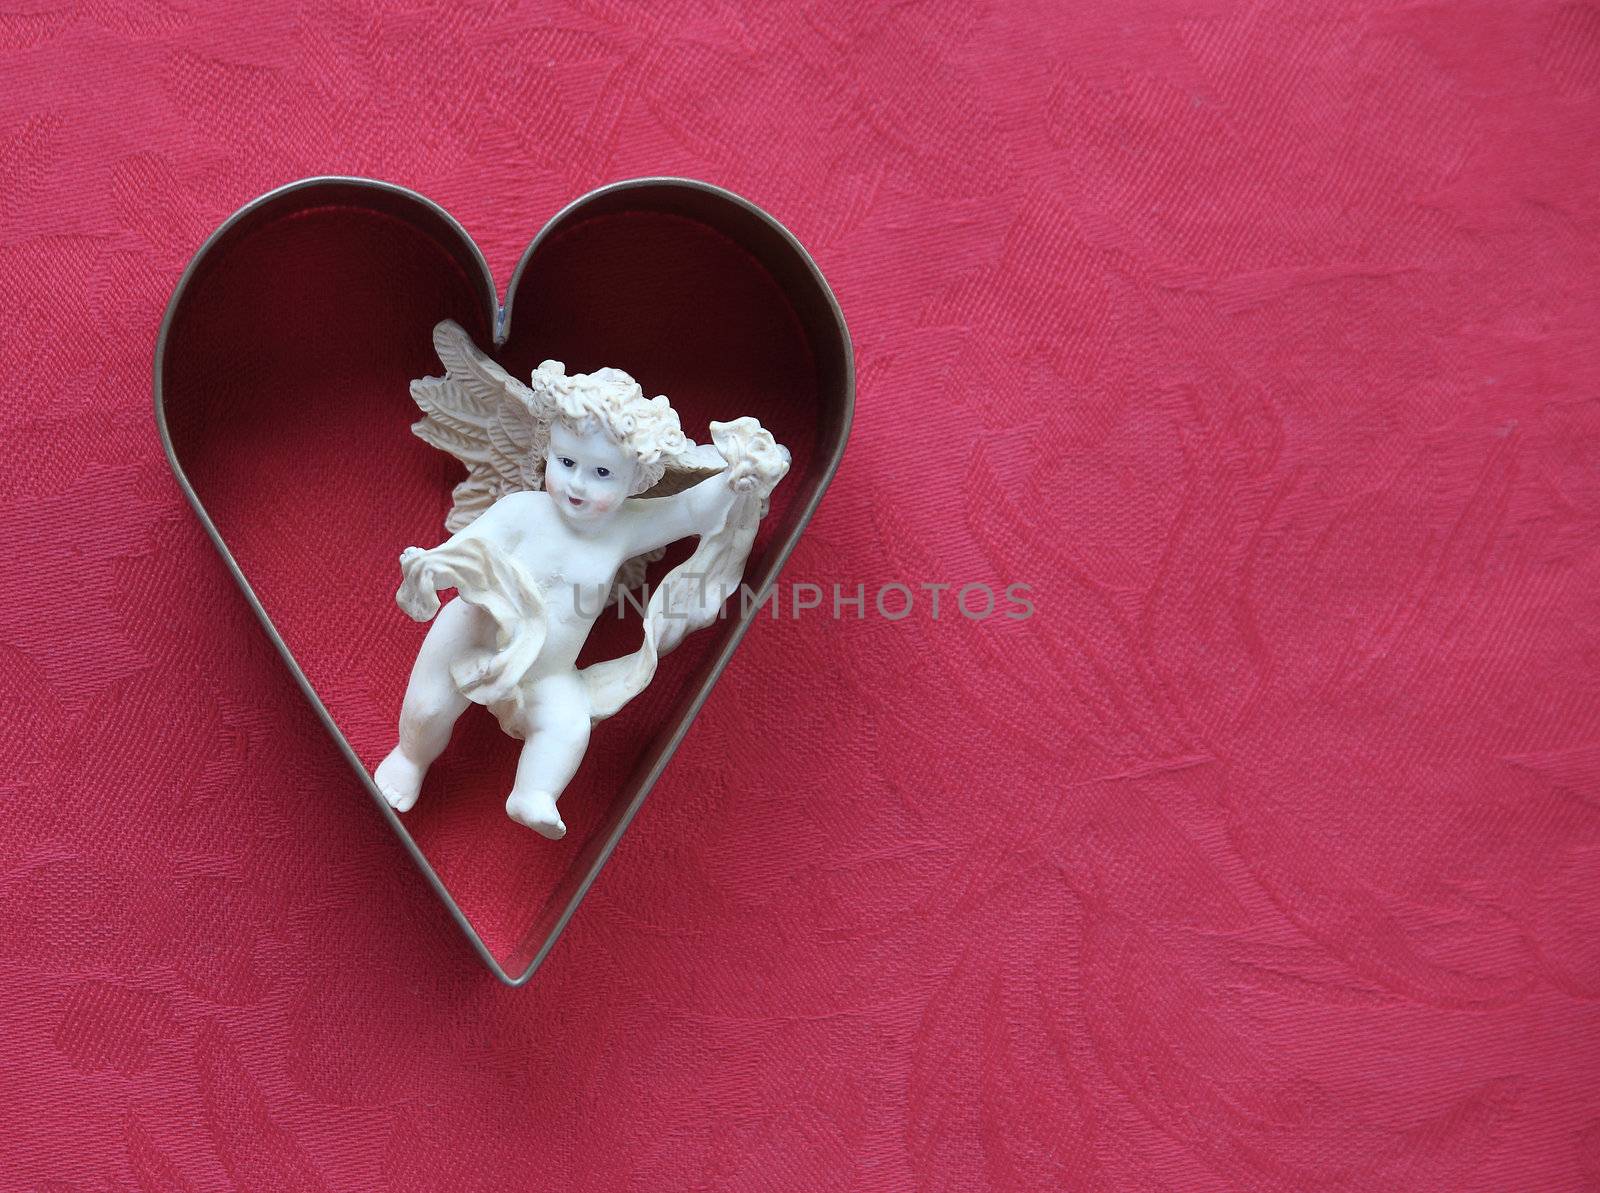 heart-shaped cookie cutter with a figure of cupid inside